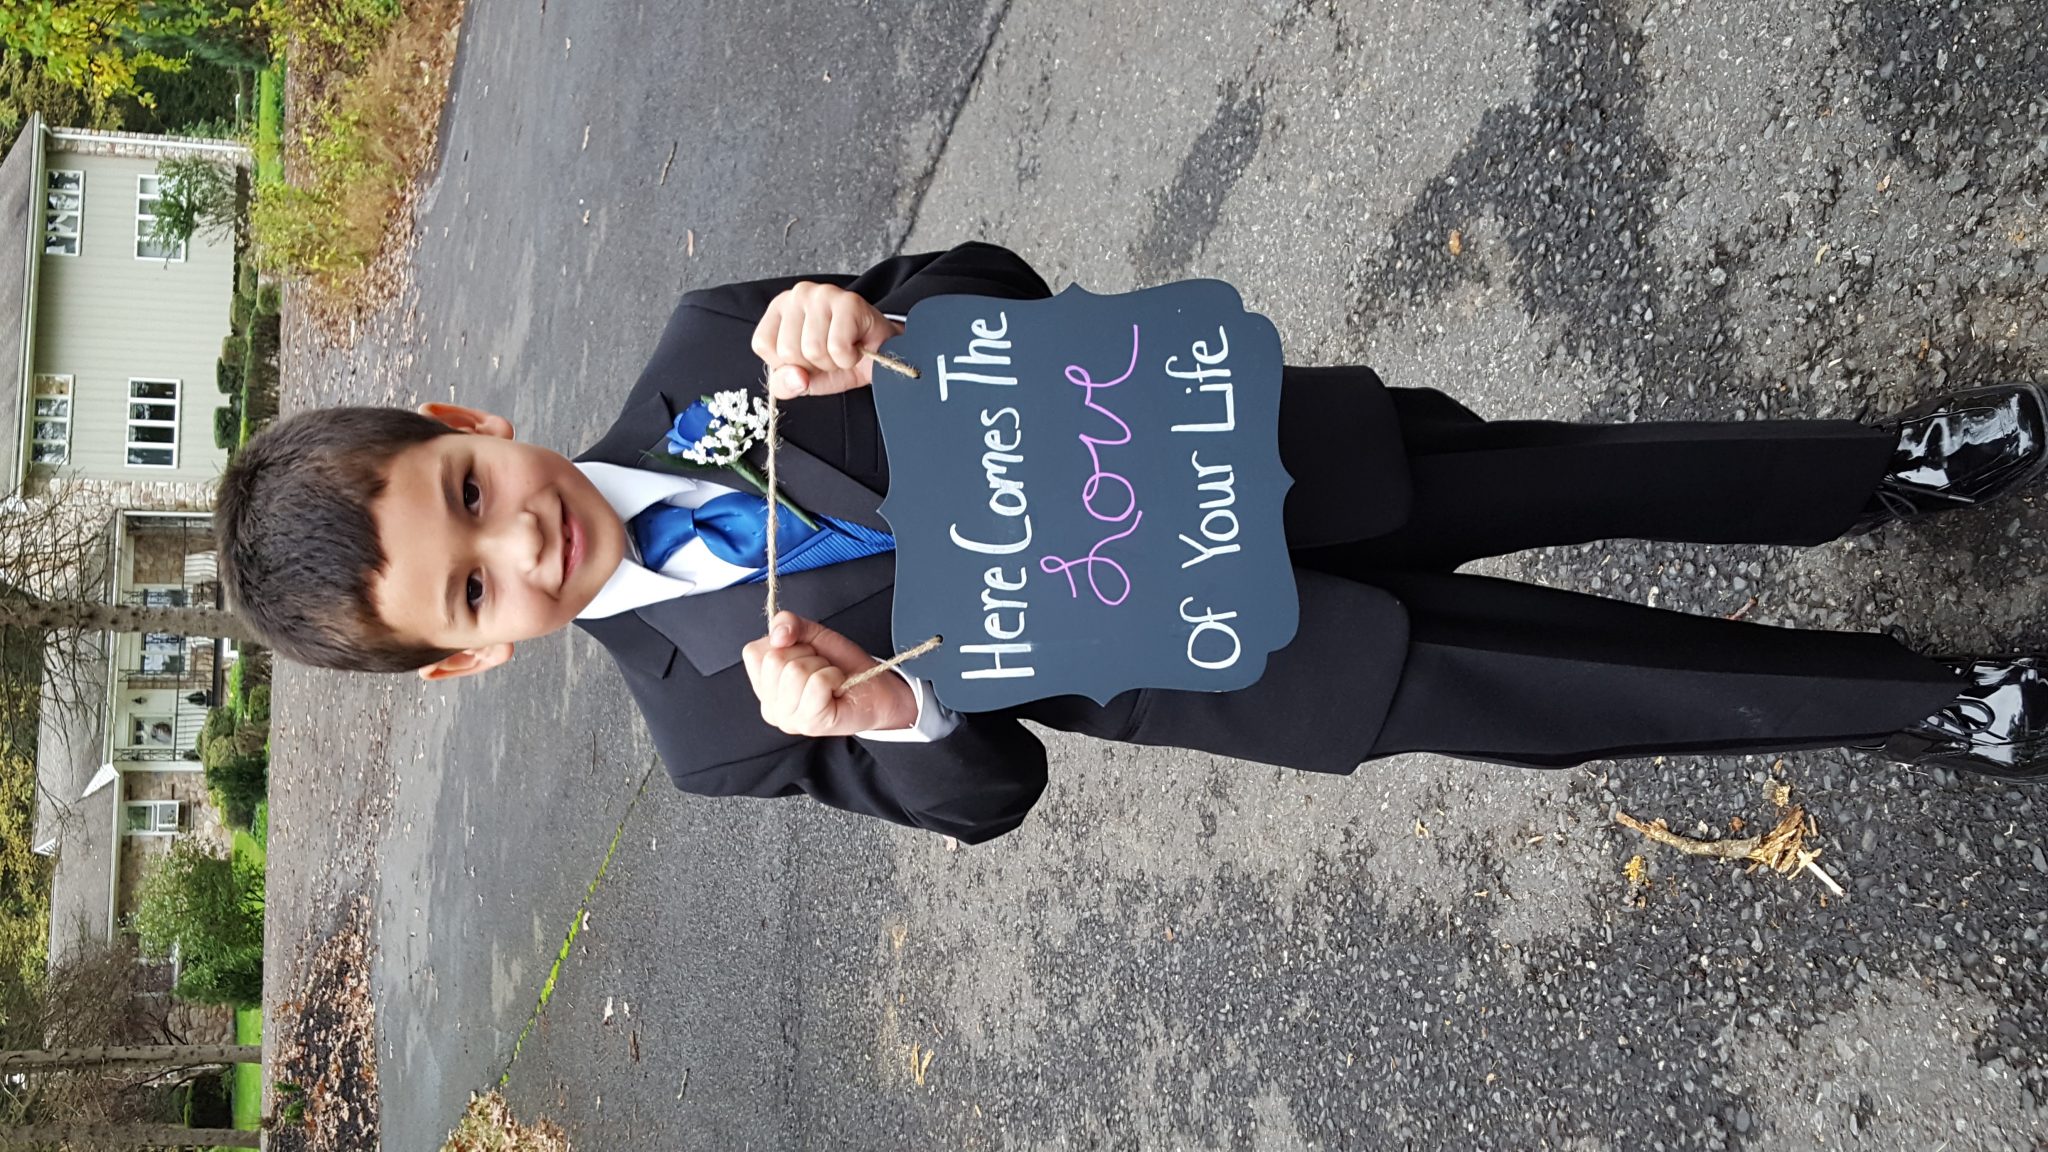 A child with a suit posing for a photo